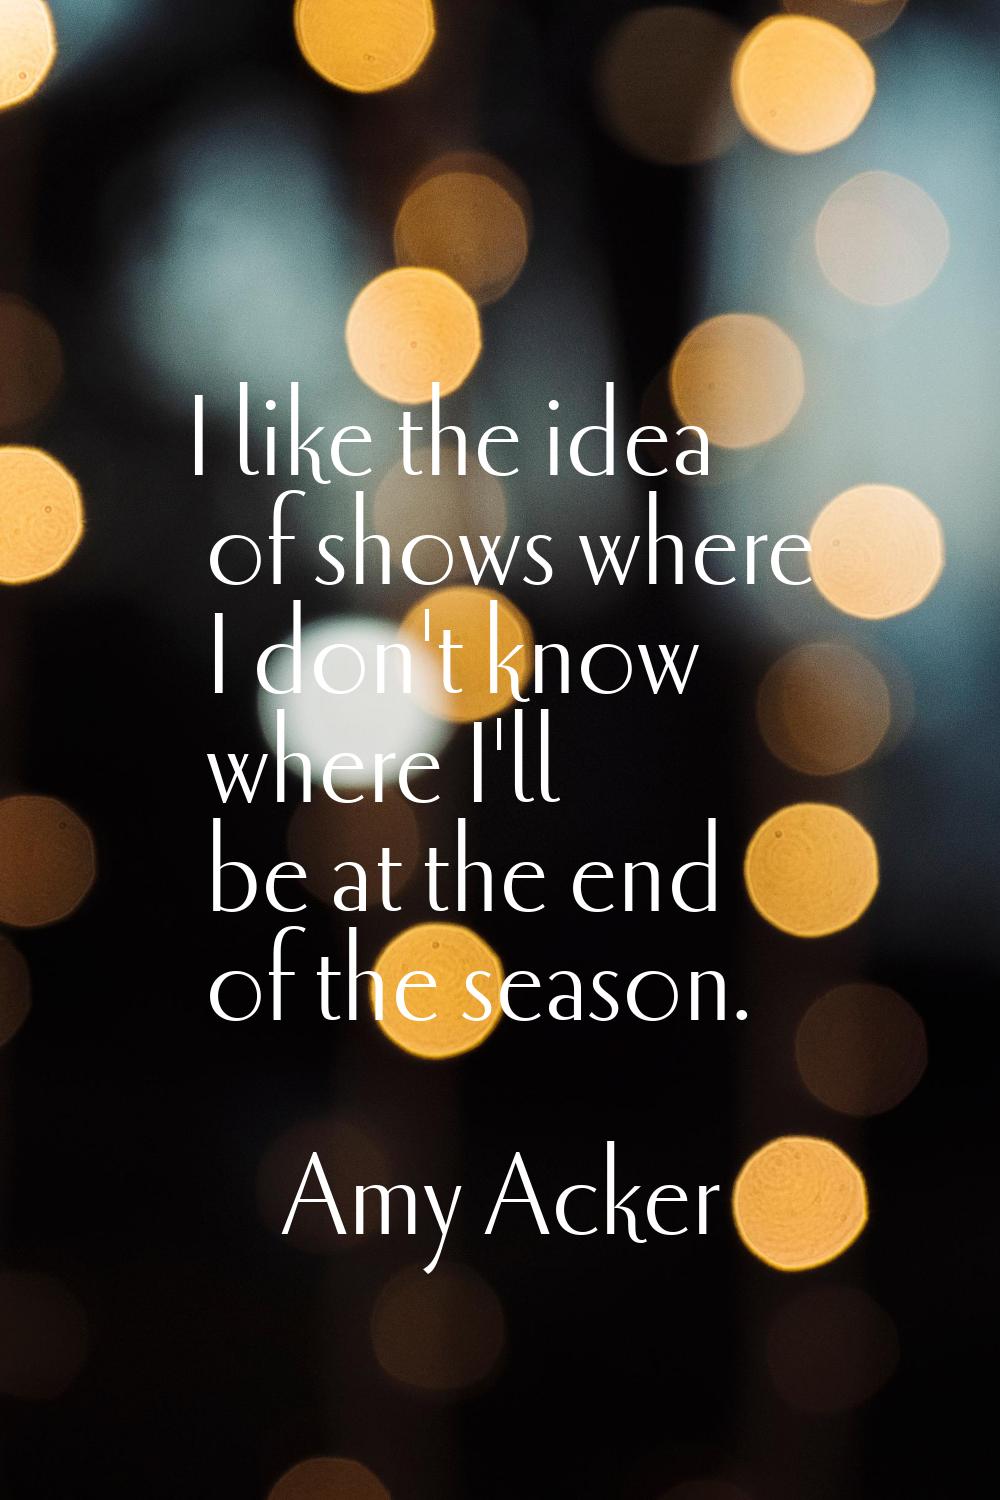 I like the idea of shows where I don't know where I'll be at the end of the season.